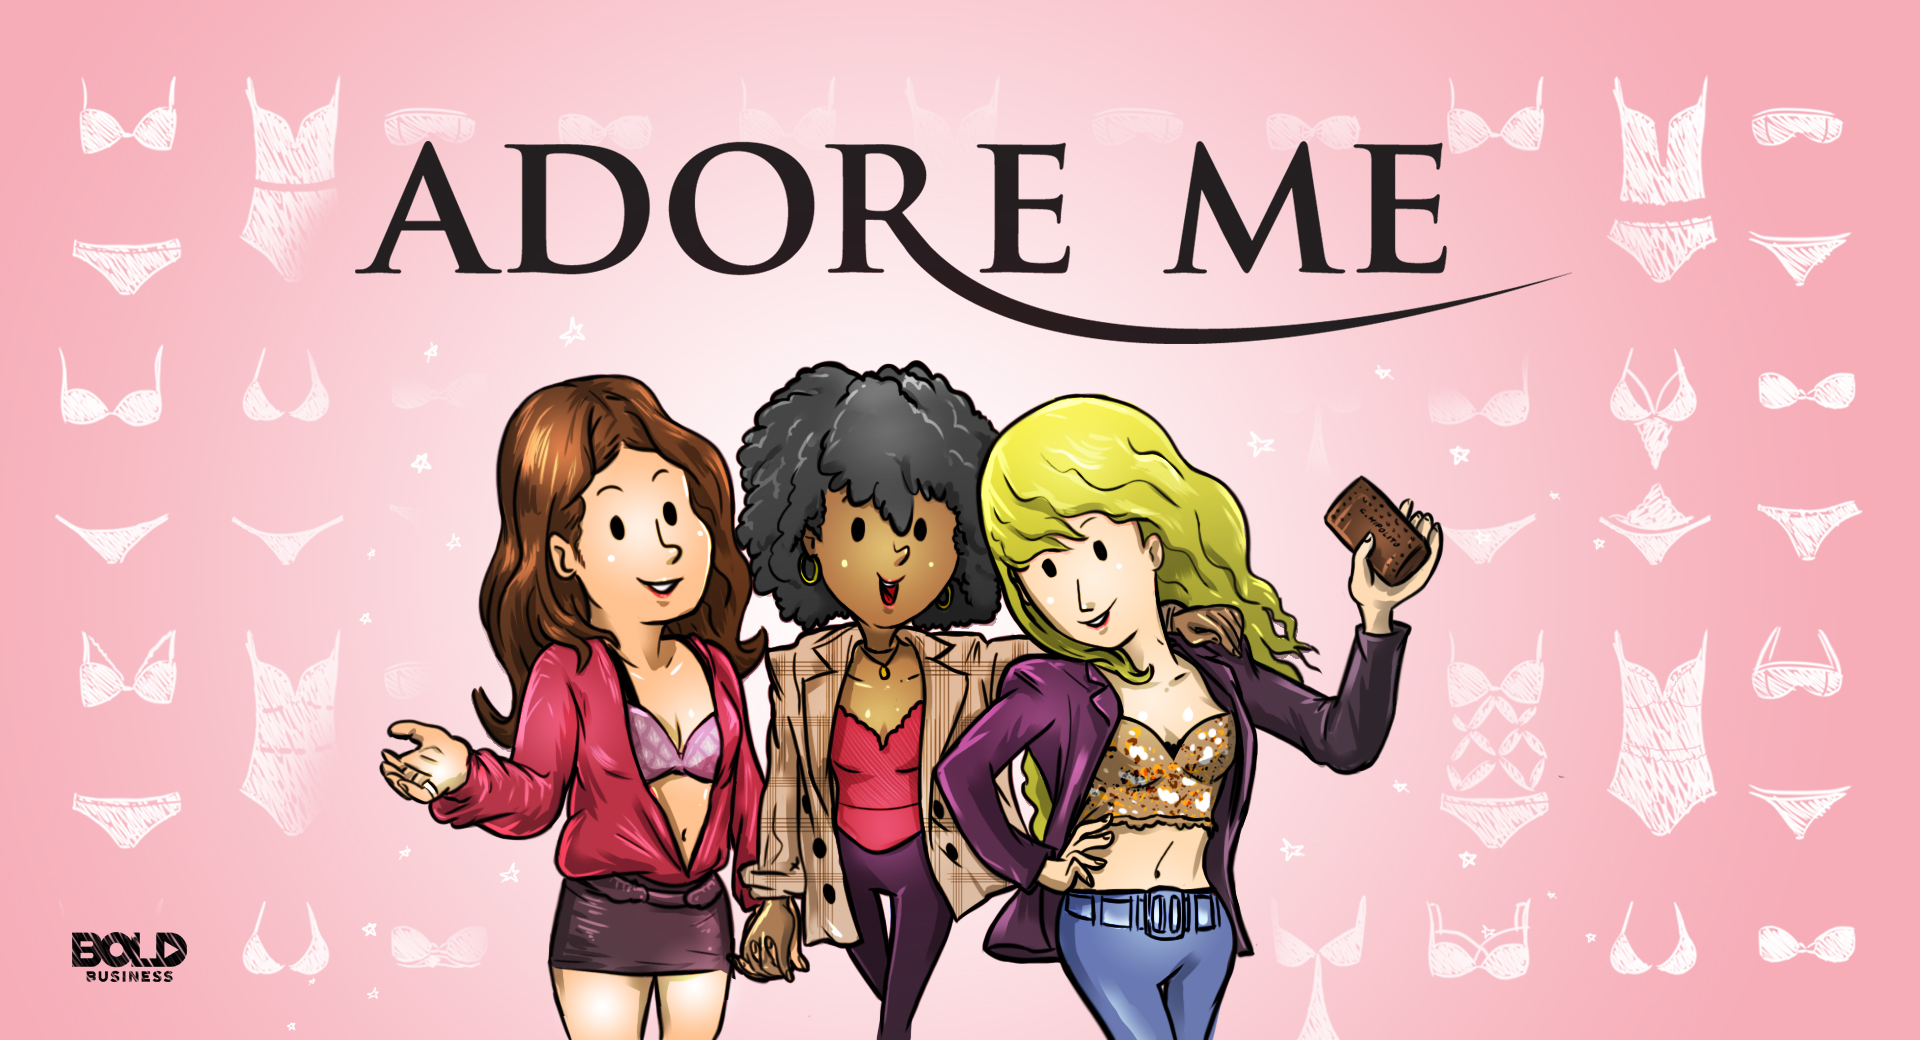 Adore Me store will rise to 300.